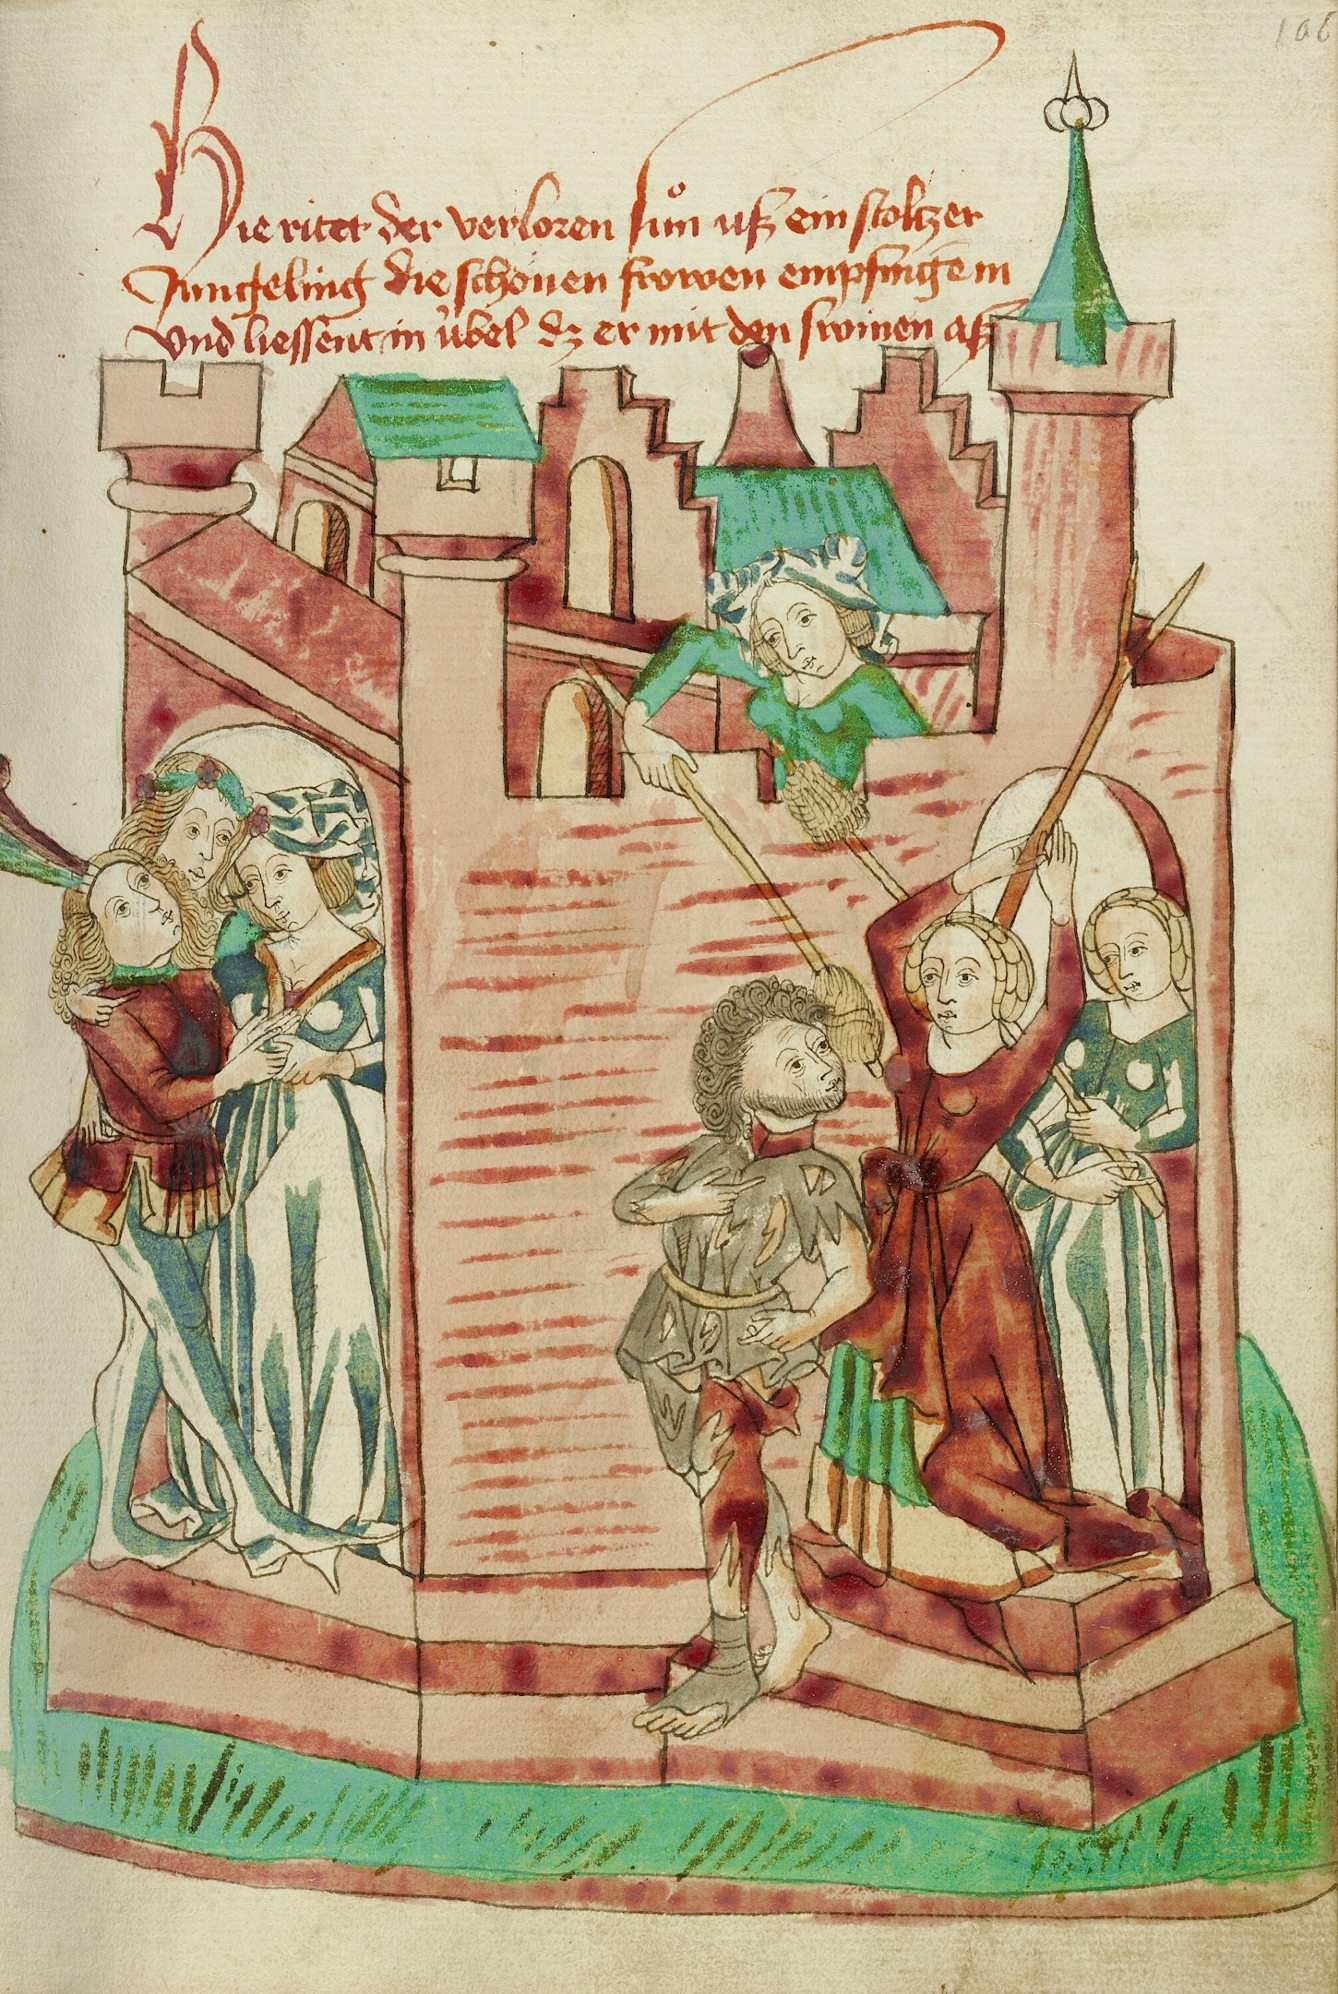 Colour image of a medieval manuscript showing, to the left, a man in lavish clothes embracing two women in a brothel. To the right, there is a man in rags being driven out of the brothel by women wielding brooms and mops. 